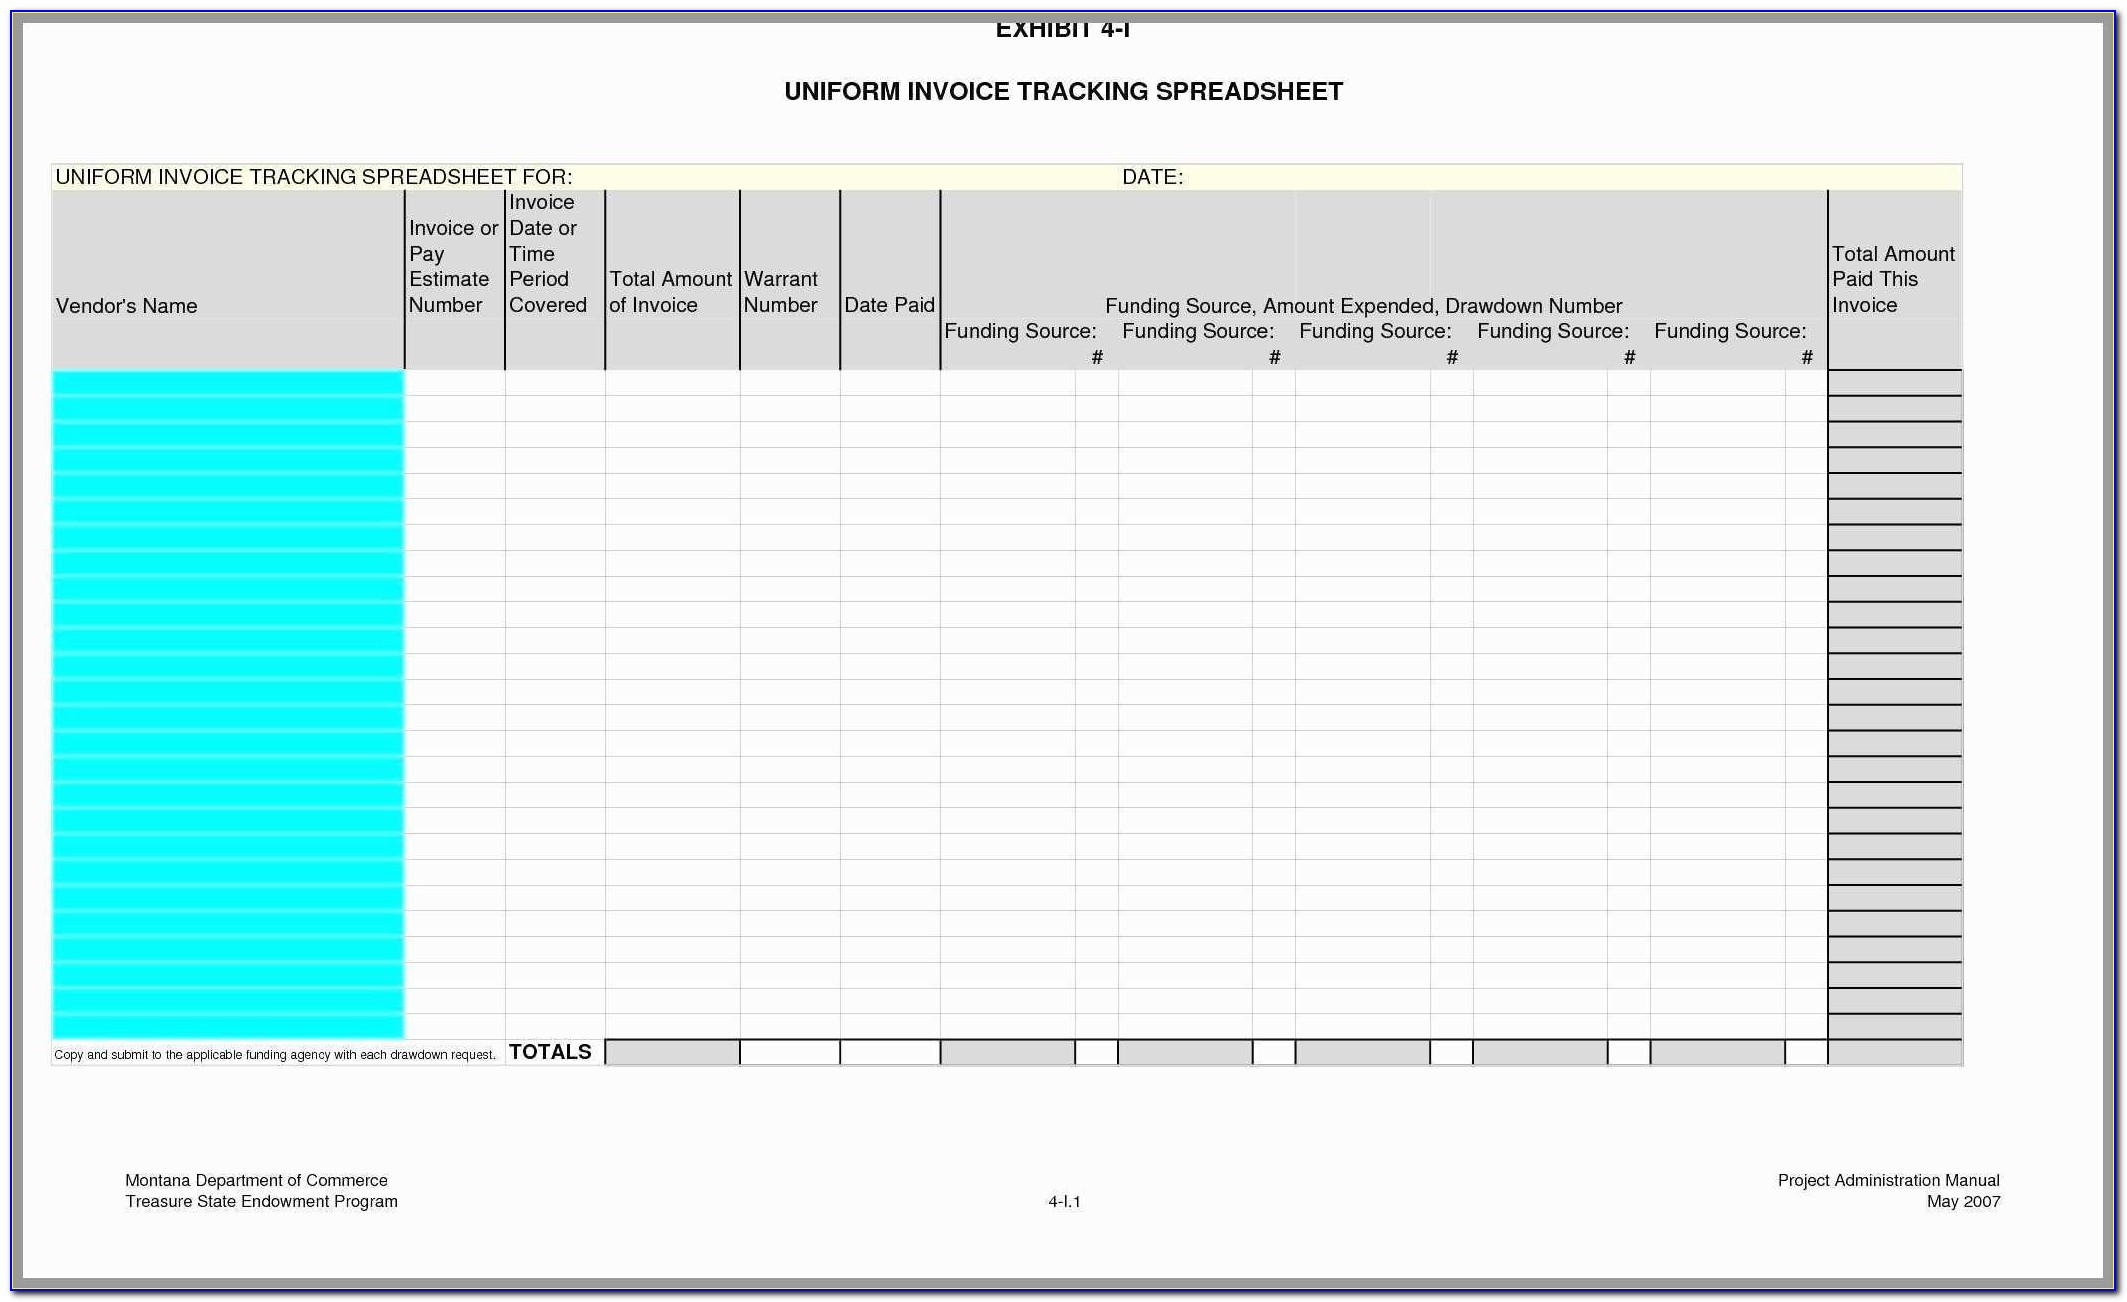 Raffle Ticket Tracking Spreadsheet Within 55 New Stocks Of Numbered Raffle Ticket Template Best Template Site